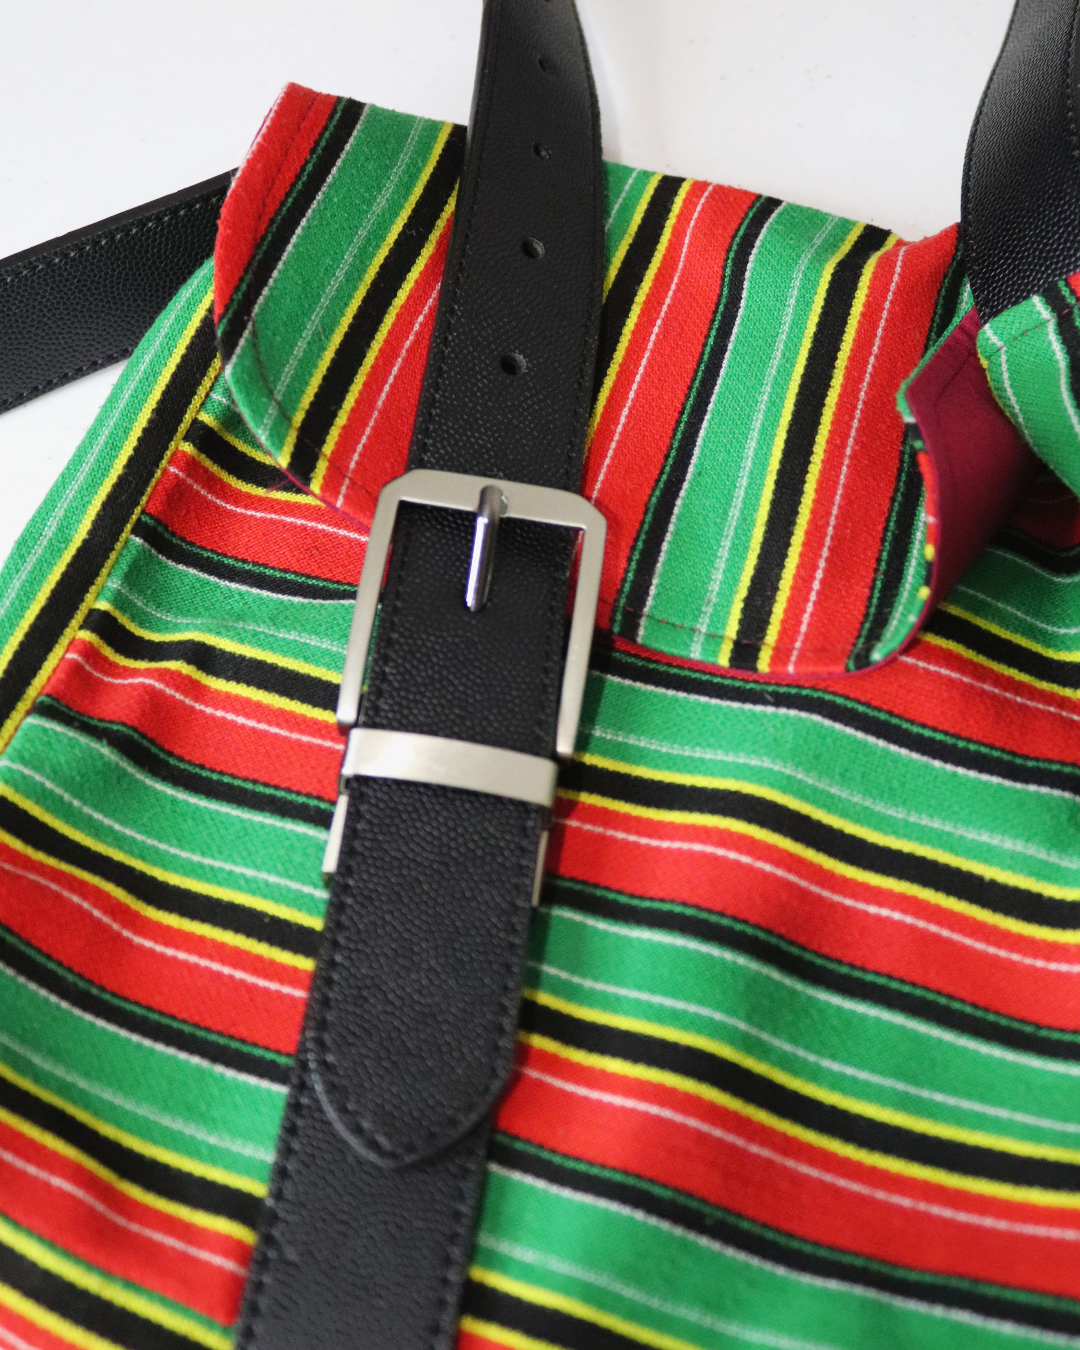 Caribbean Striped Upcycled Satchel Bag with Belt Strap